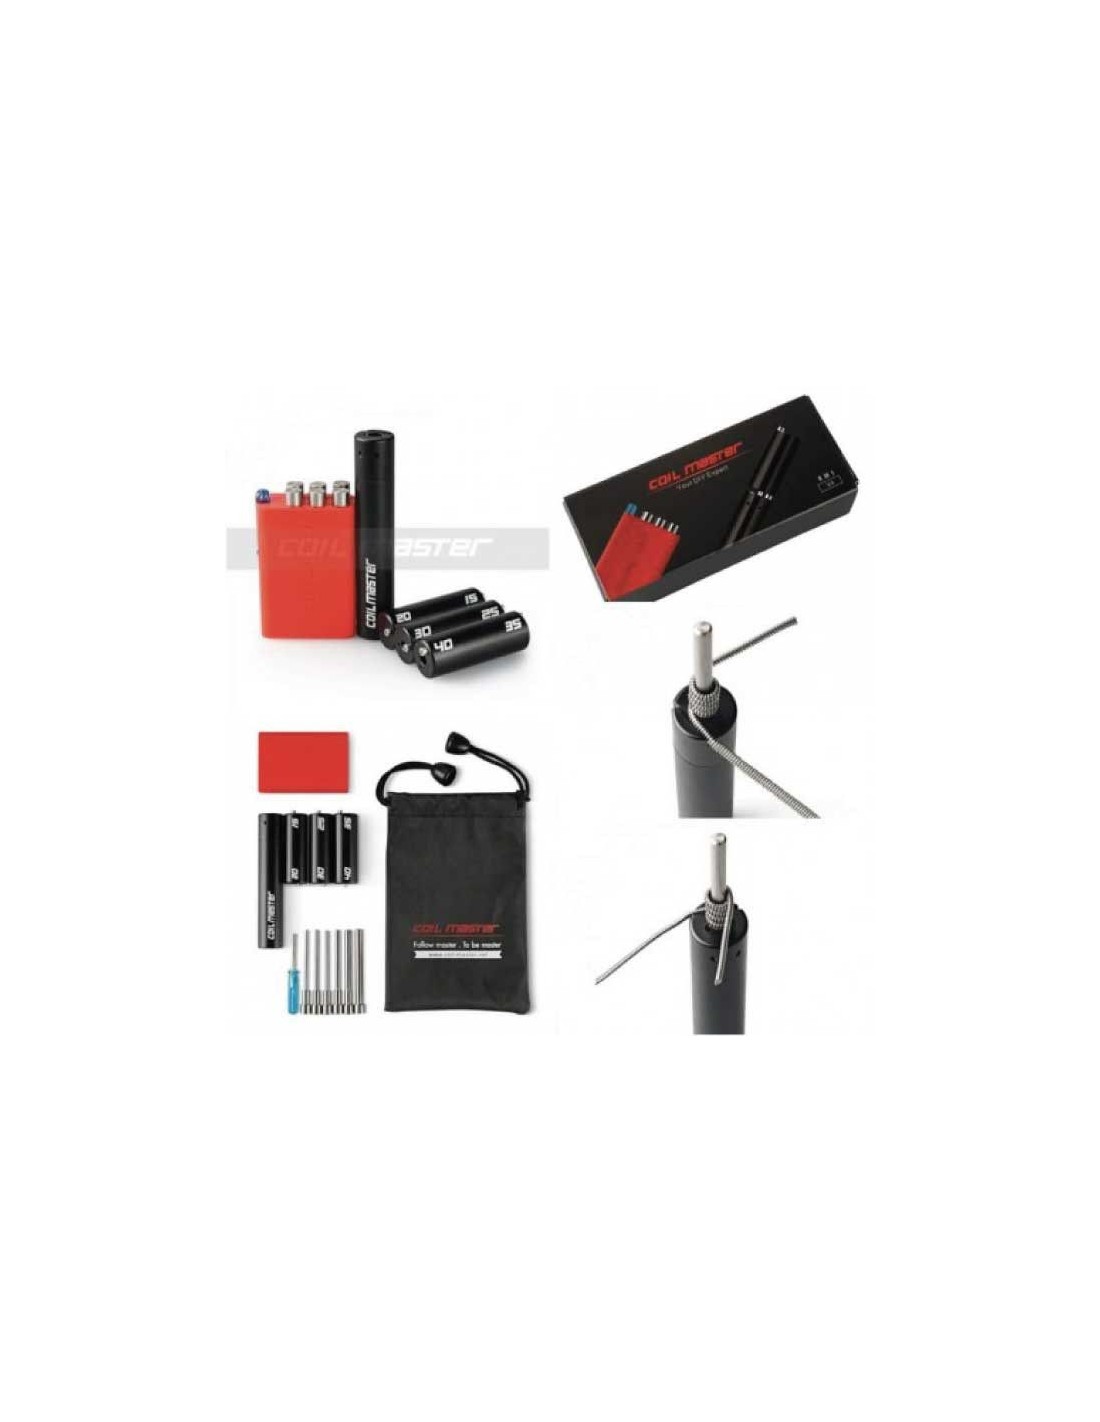 Coiling Kit V4 by Coil Master - for creating Resistances